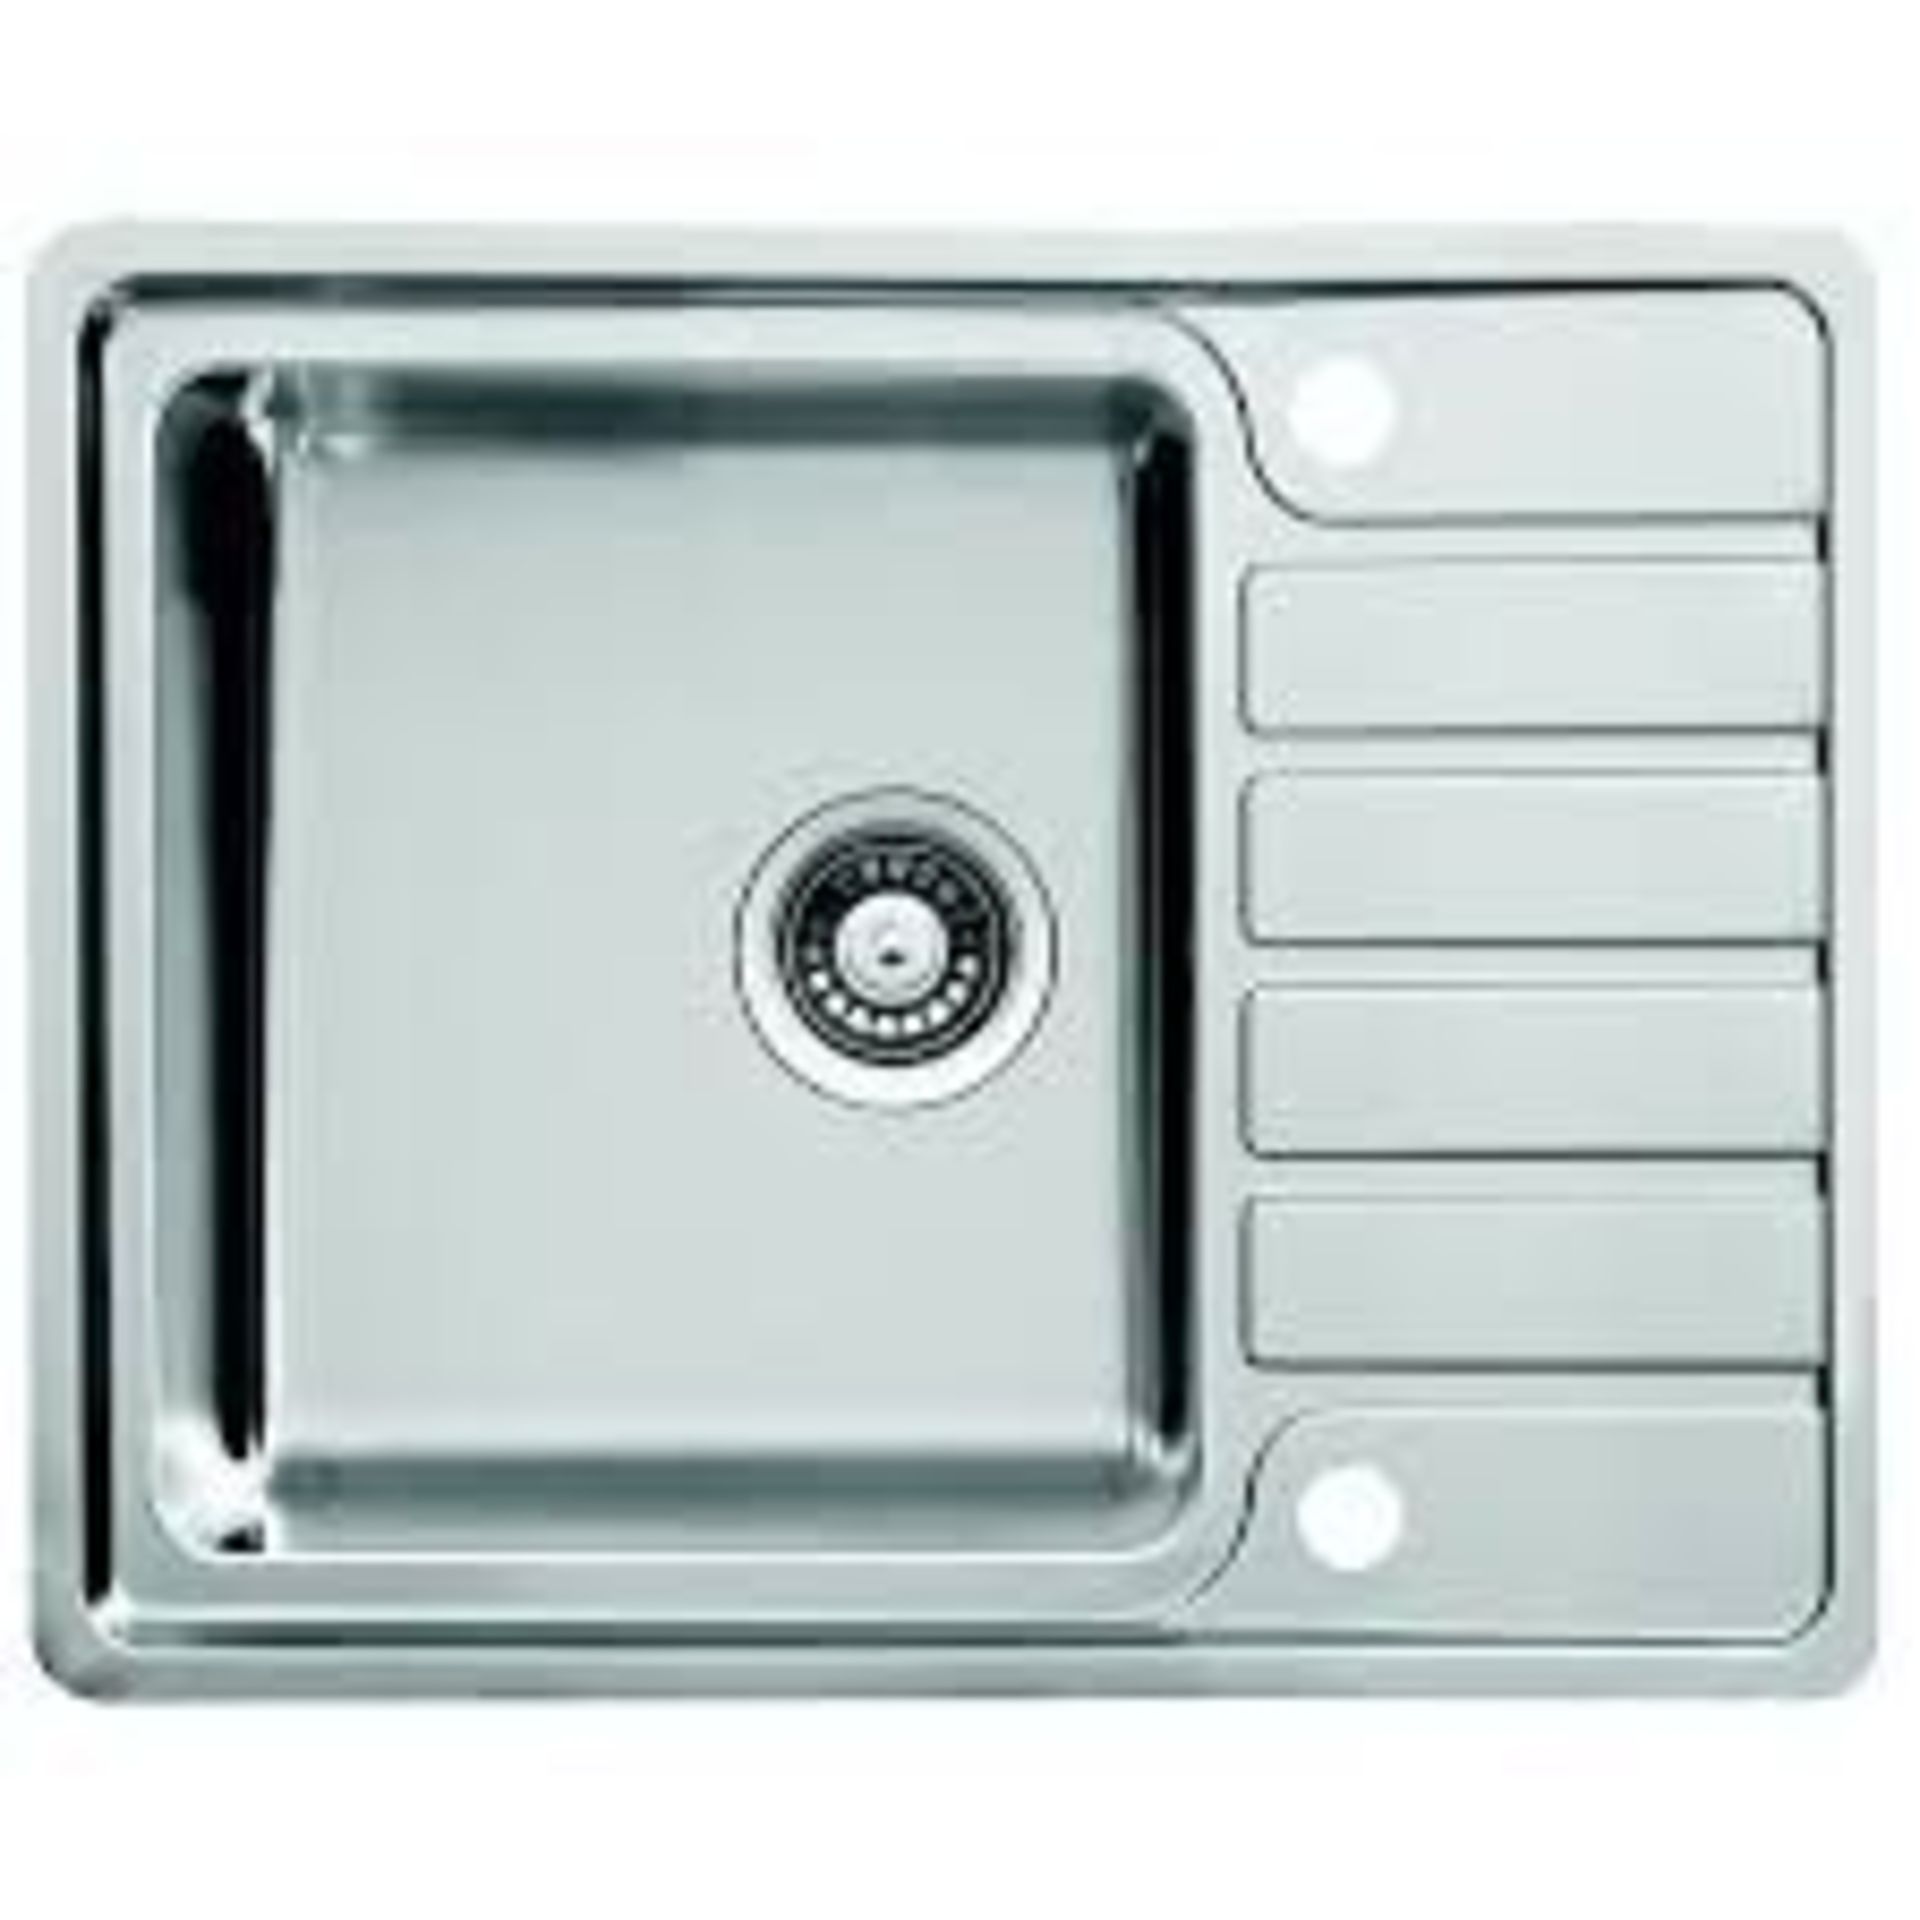 GoodHome Quassia Brushed Stainless steel 1 Bowl Kitchen sink. - PW.